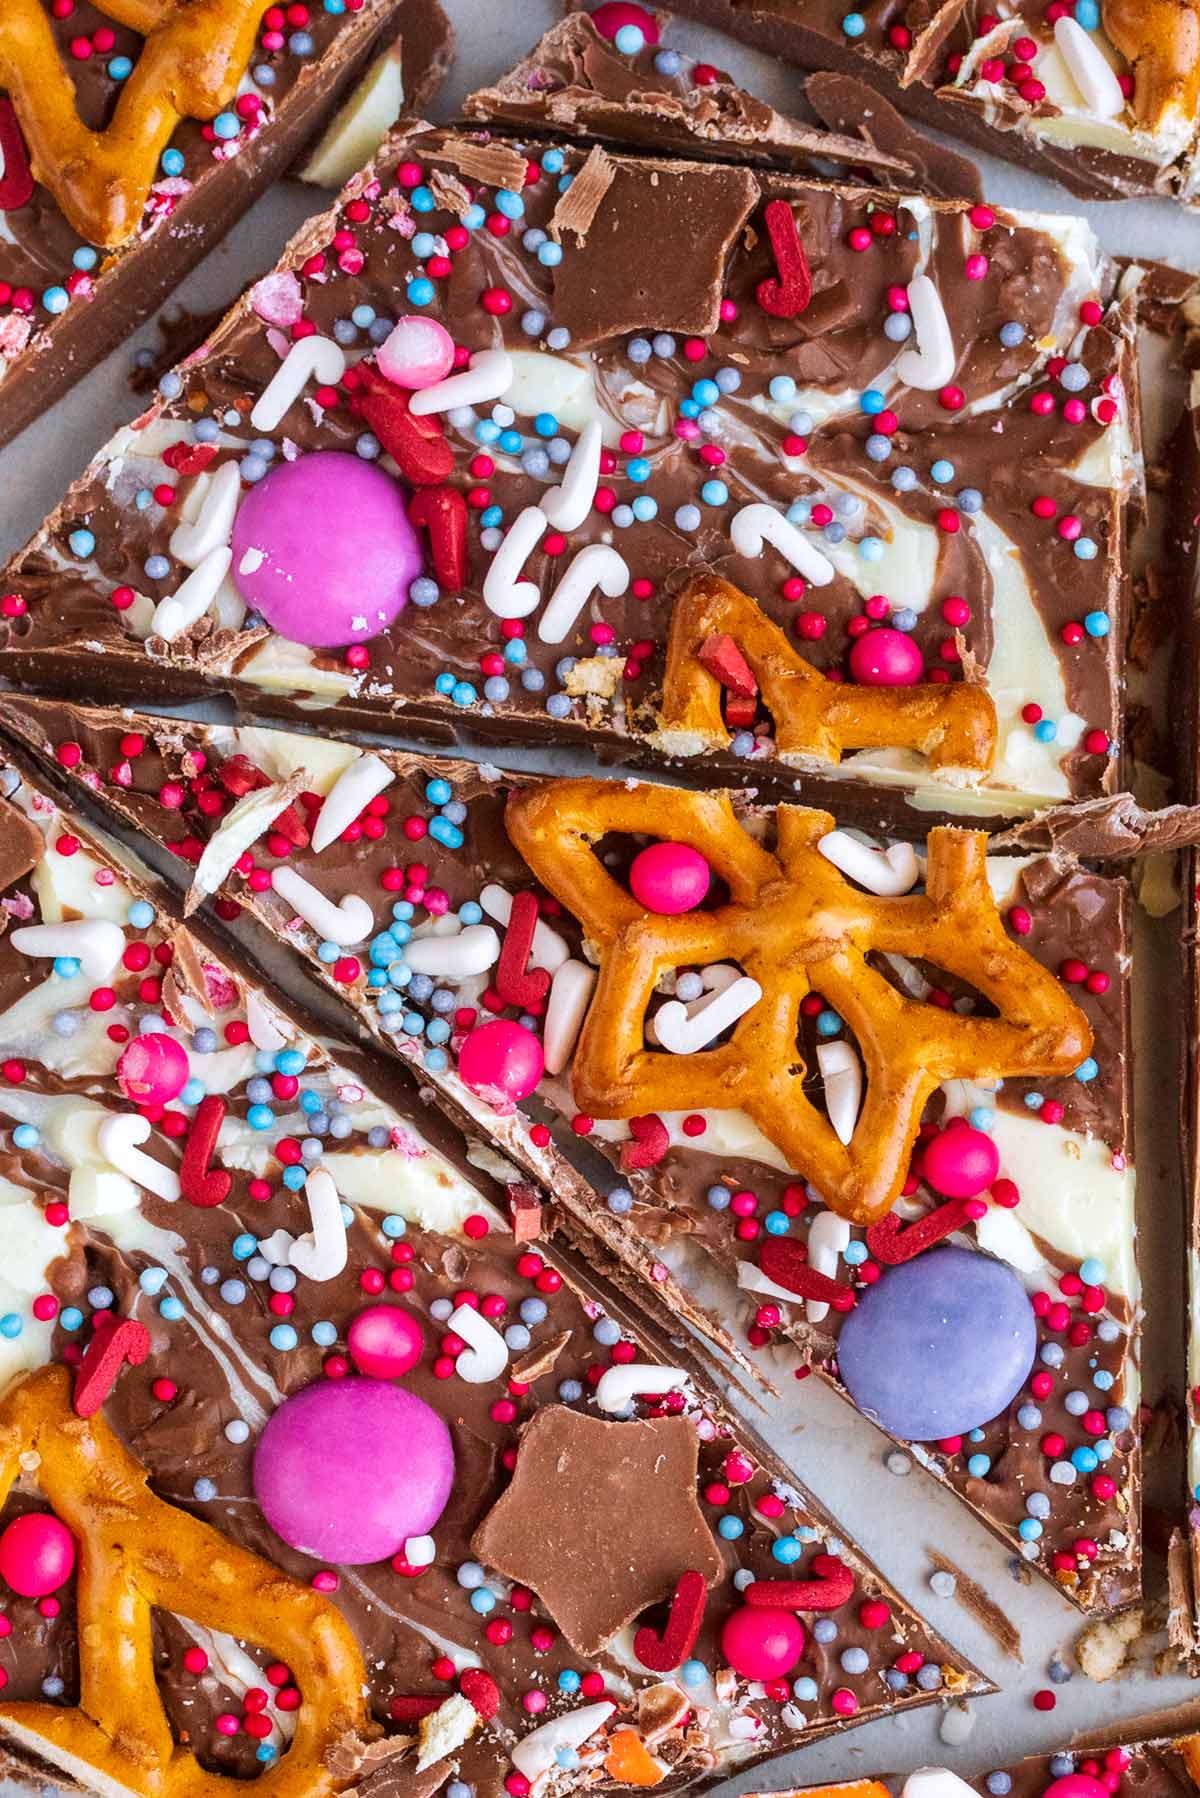 A star shaped pretzel, some Smarties and festive sprinkles on top of chocolate.